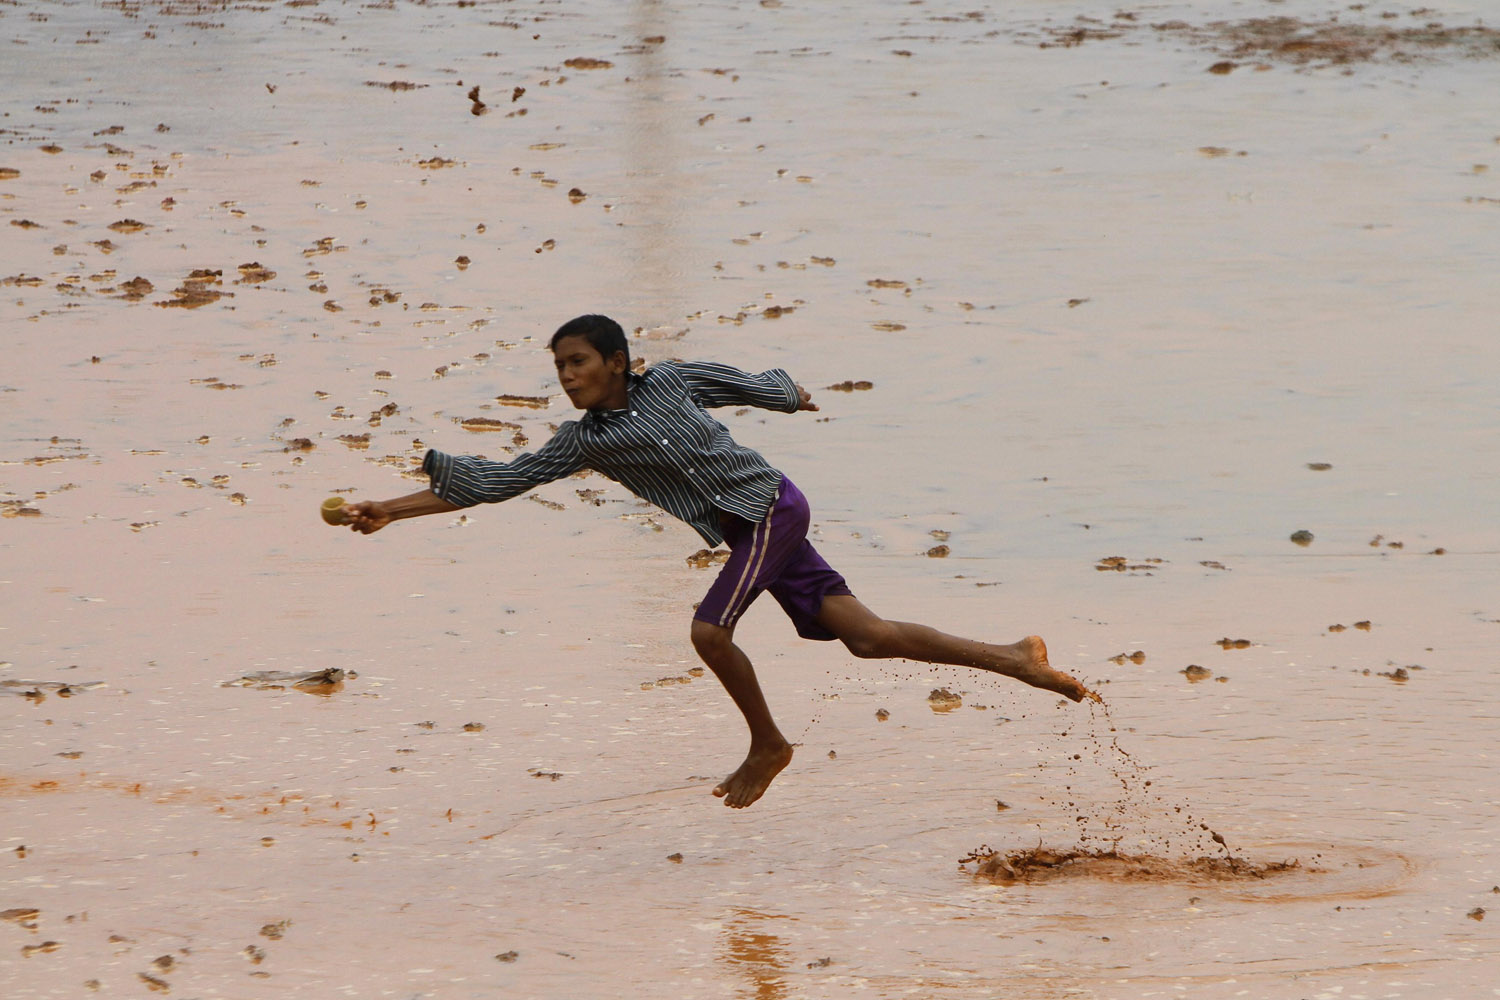 A boy dives to catch the ball while playing cricket in a water-logged play ground in Chennai